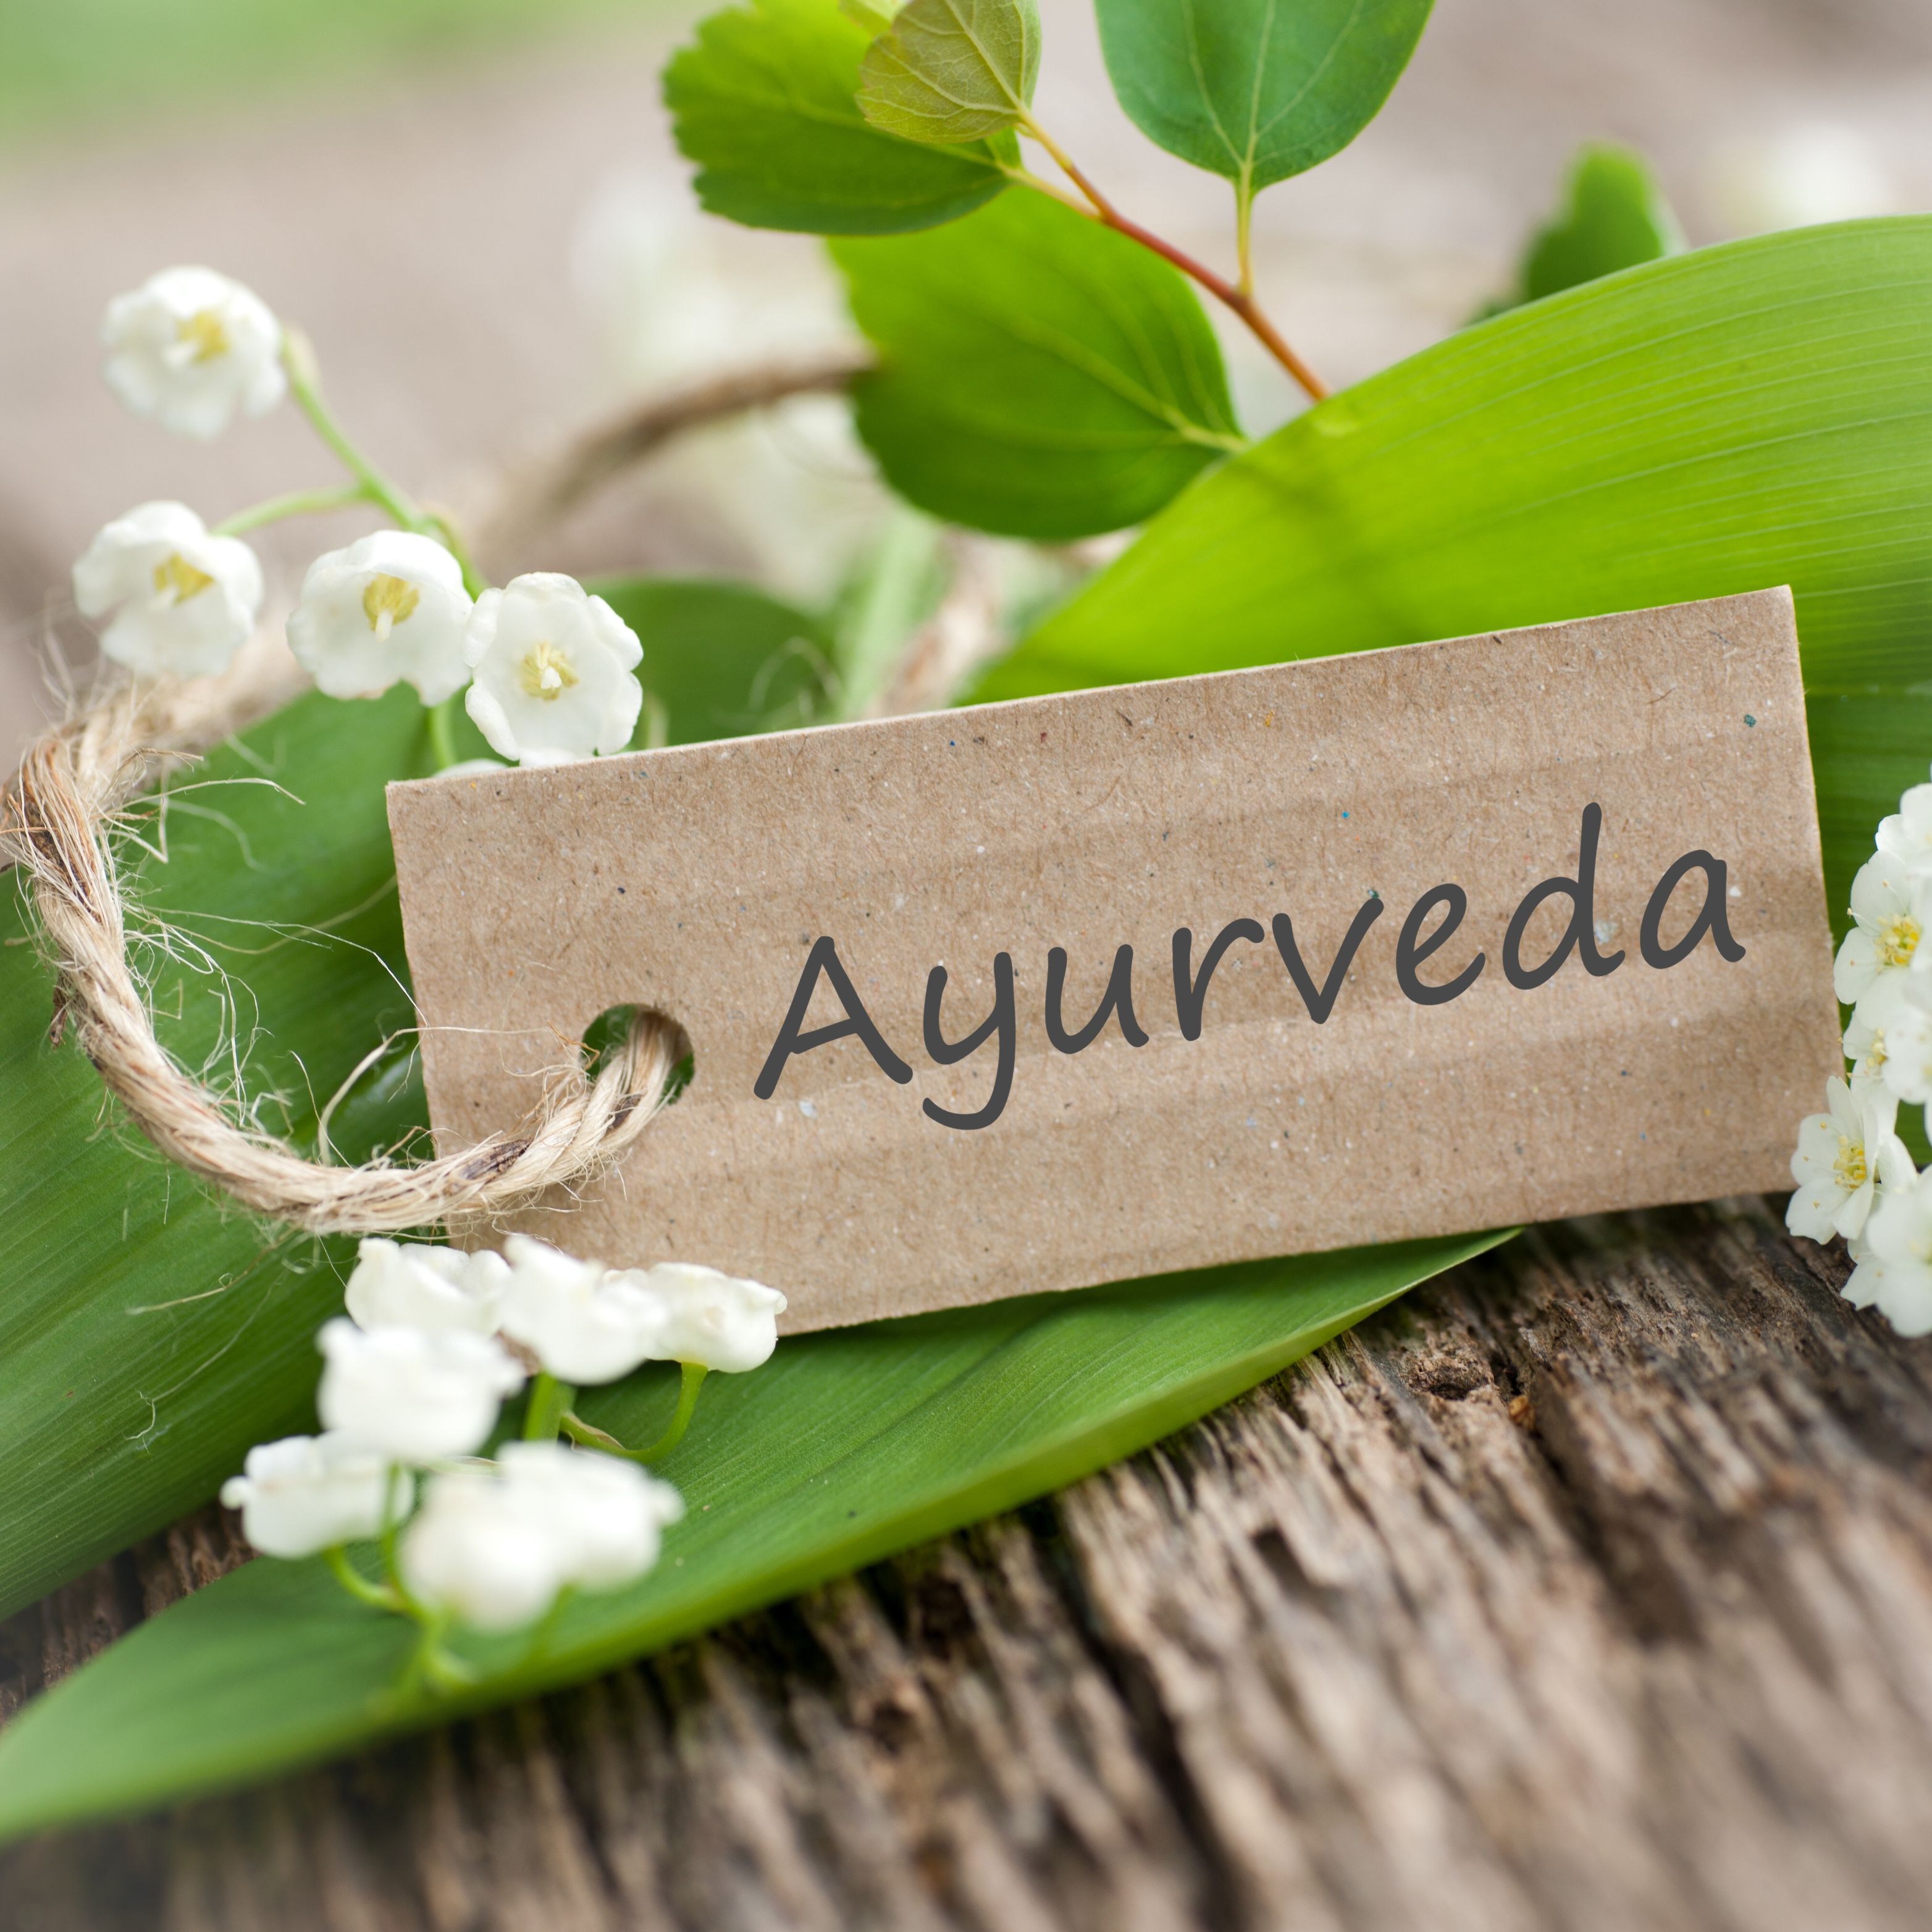 Daily Ayurveda in 5 Easy Steps!